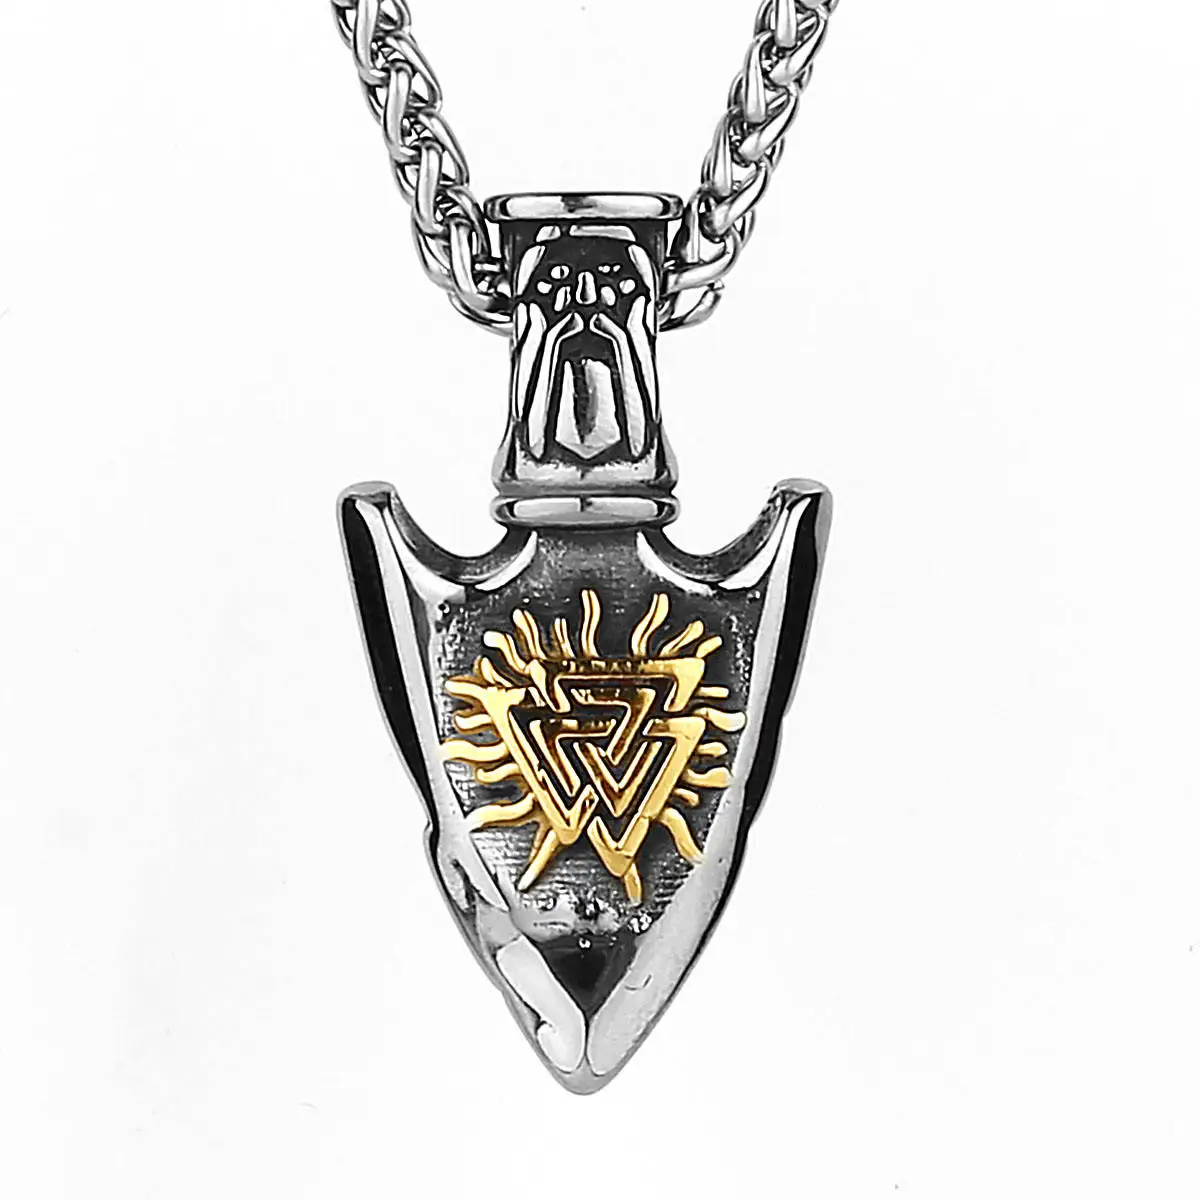 

Carline New Nordic Viking Jewelry Men Stainless Steel Punk Arrow Rune Compass Pendant Necklaces For Men Jewellery Gift